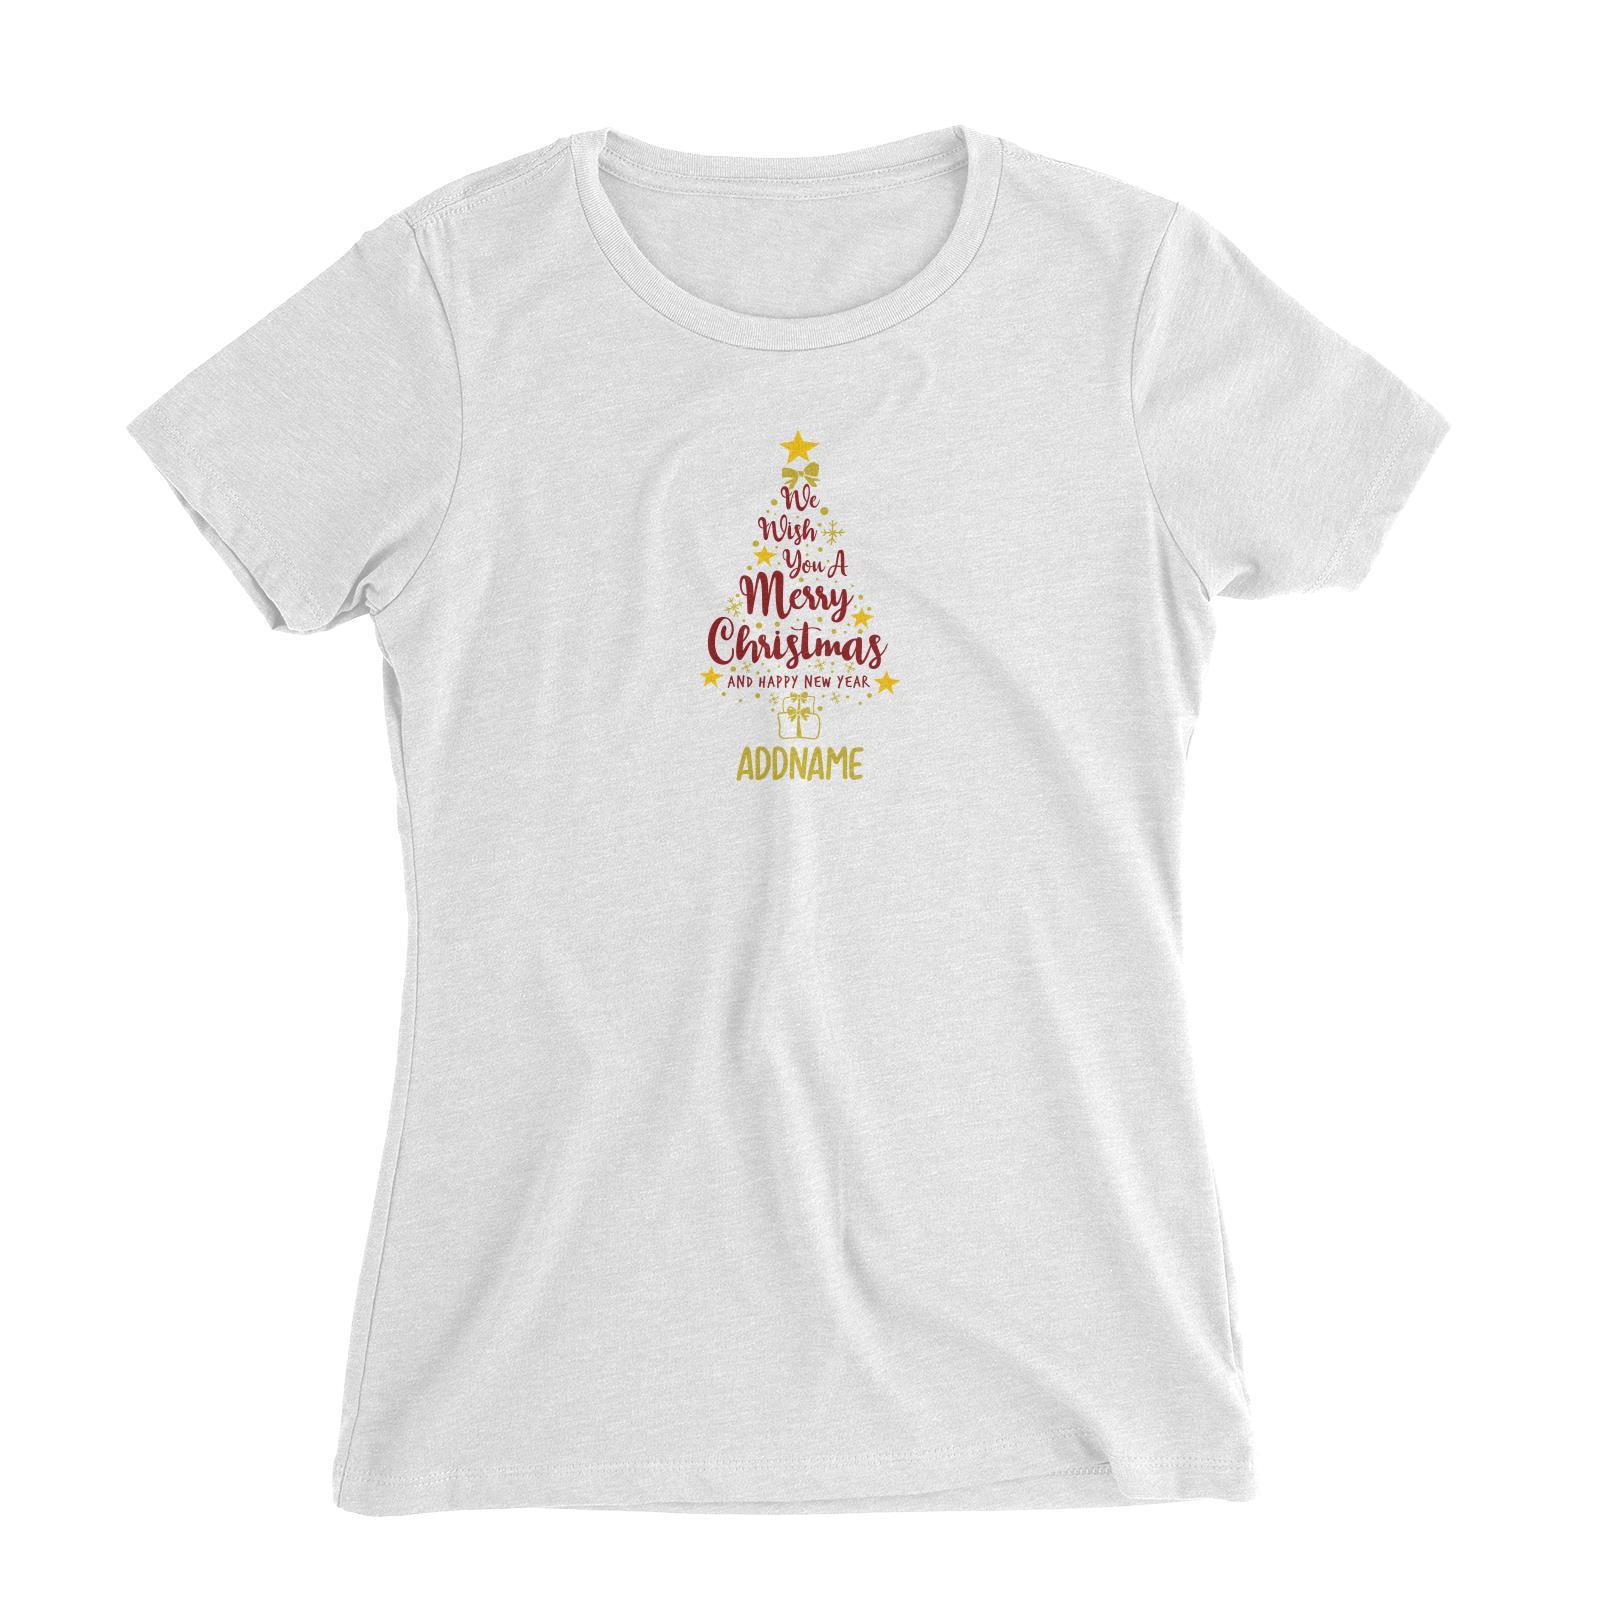 Xmas We Wish You A Merry Christmas and A Happy New Year Women's Slim Fit T-Shirt